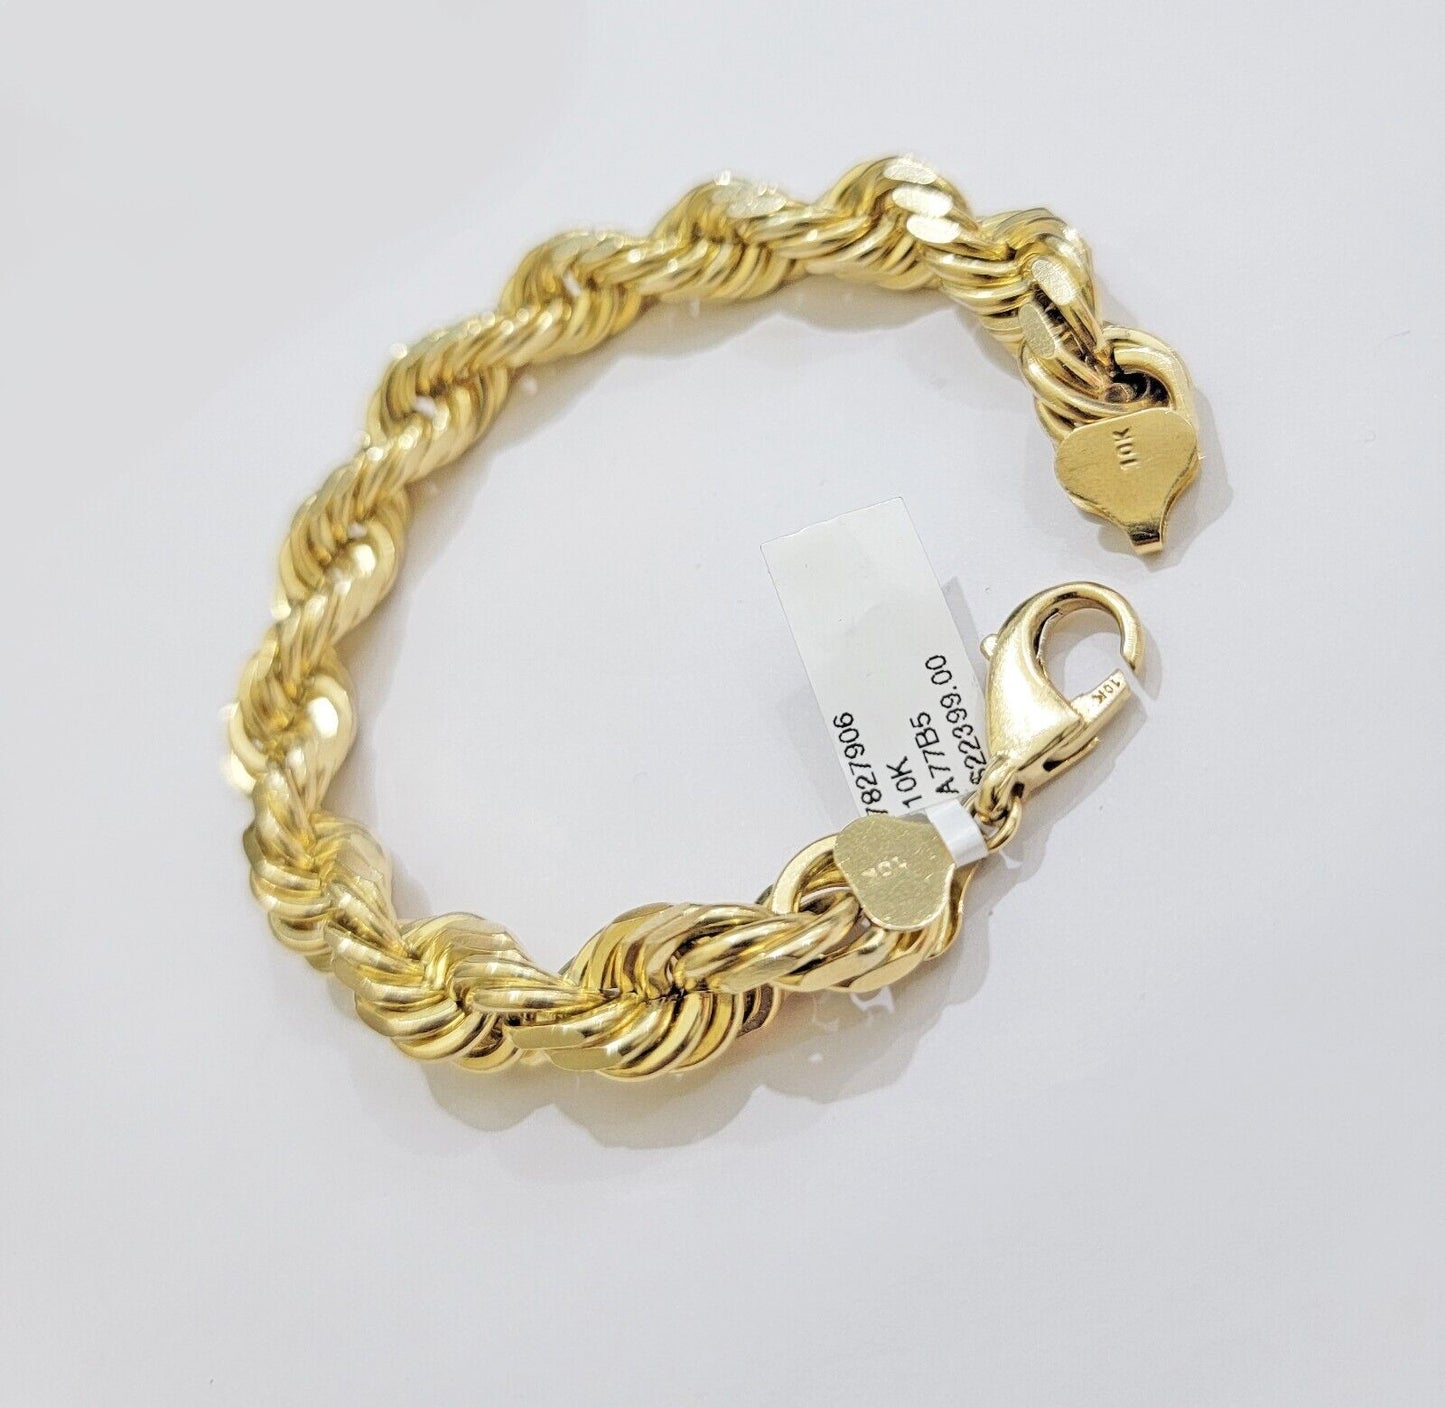 10mm Rope Bracelet 9 Inch Solid 10k Yellow Gold With Diamond cuts Mens REAL 10KT